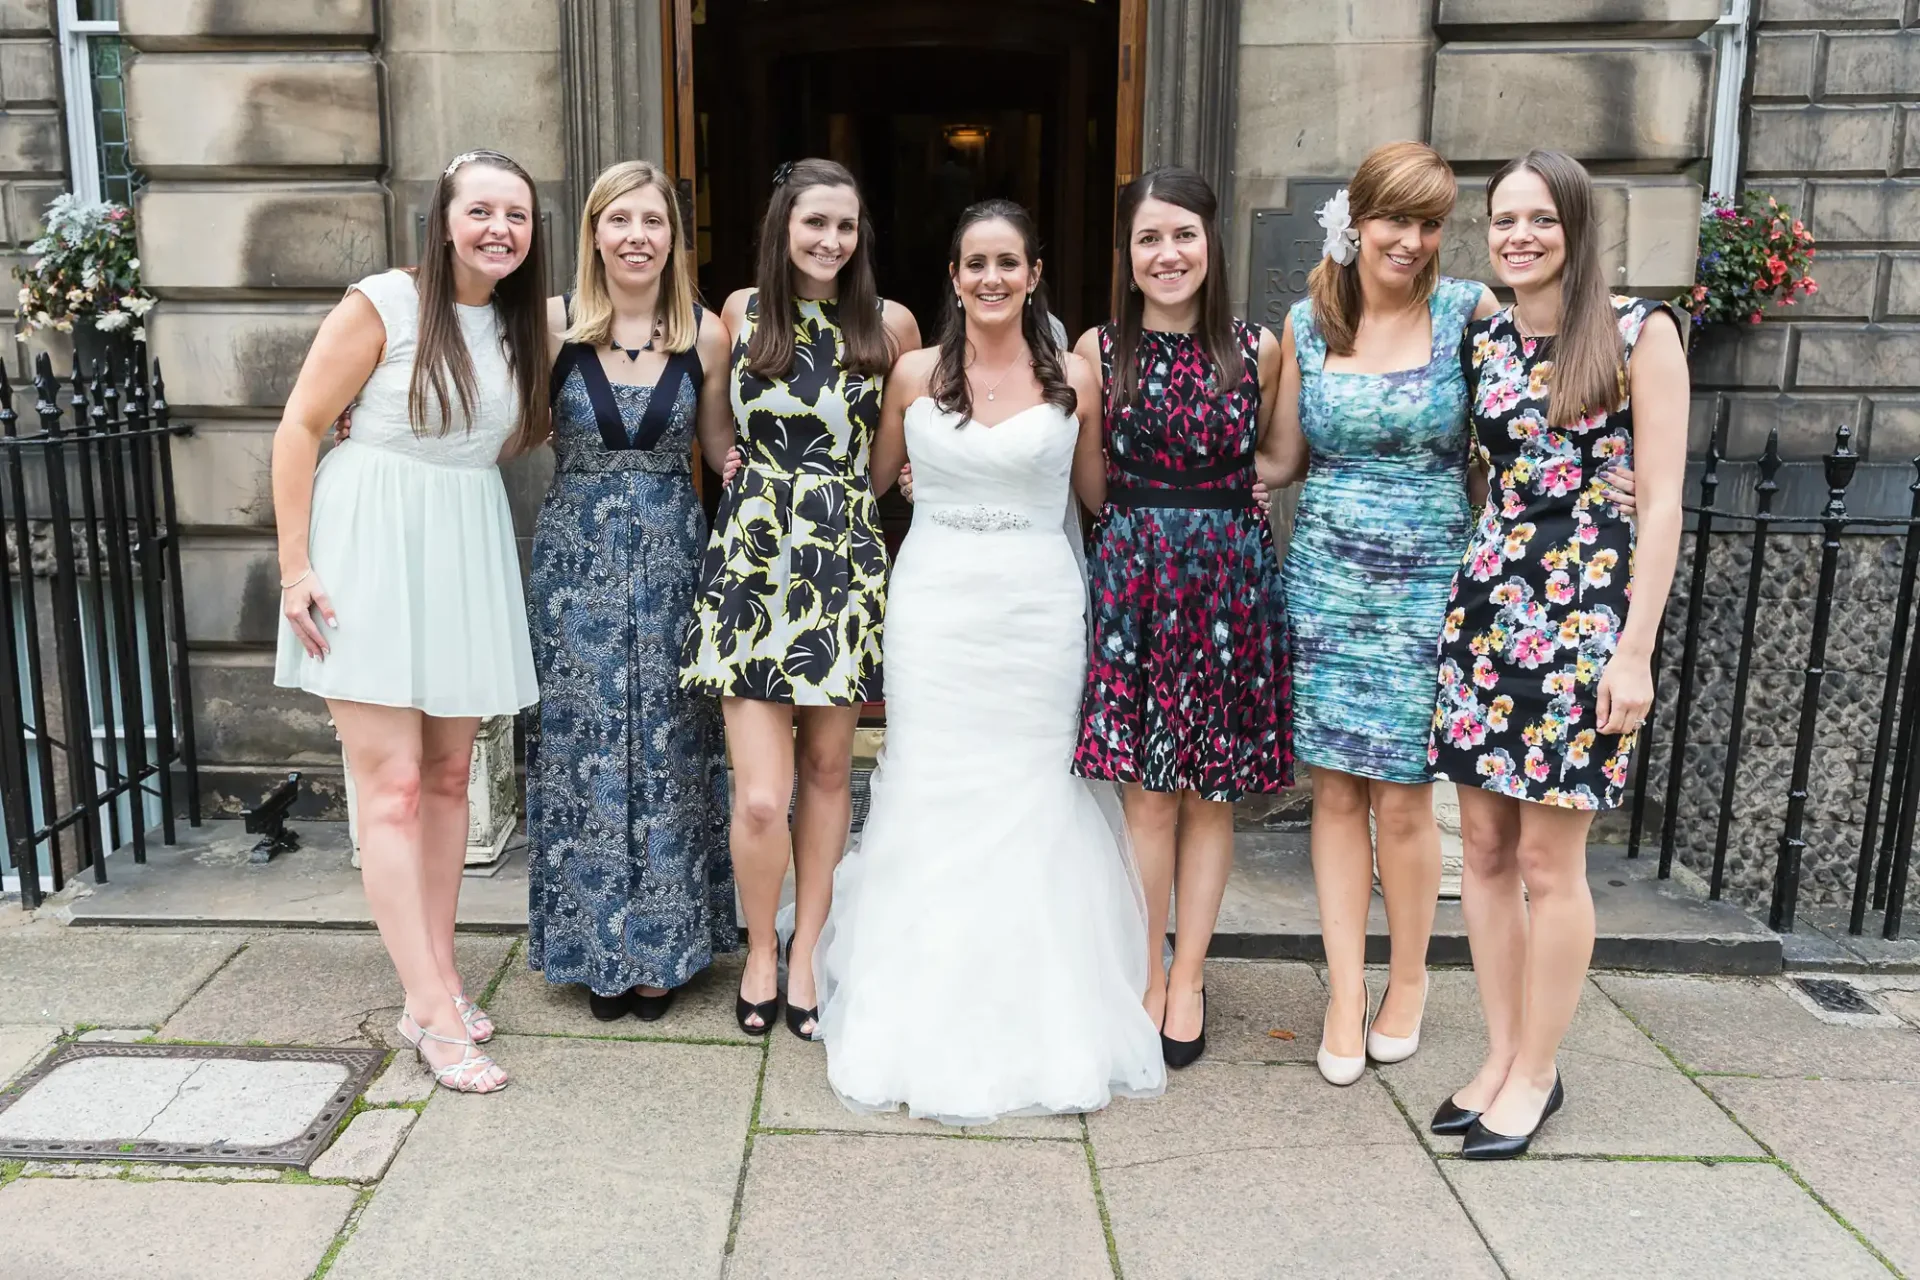 Seven women in dresses, including one in a white bridal gown, smiling and posing together on a cobblestone street.